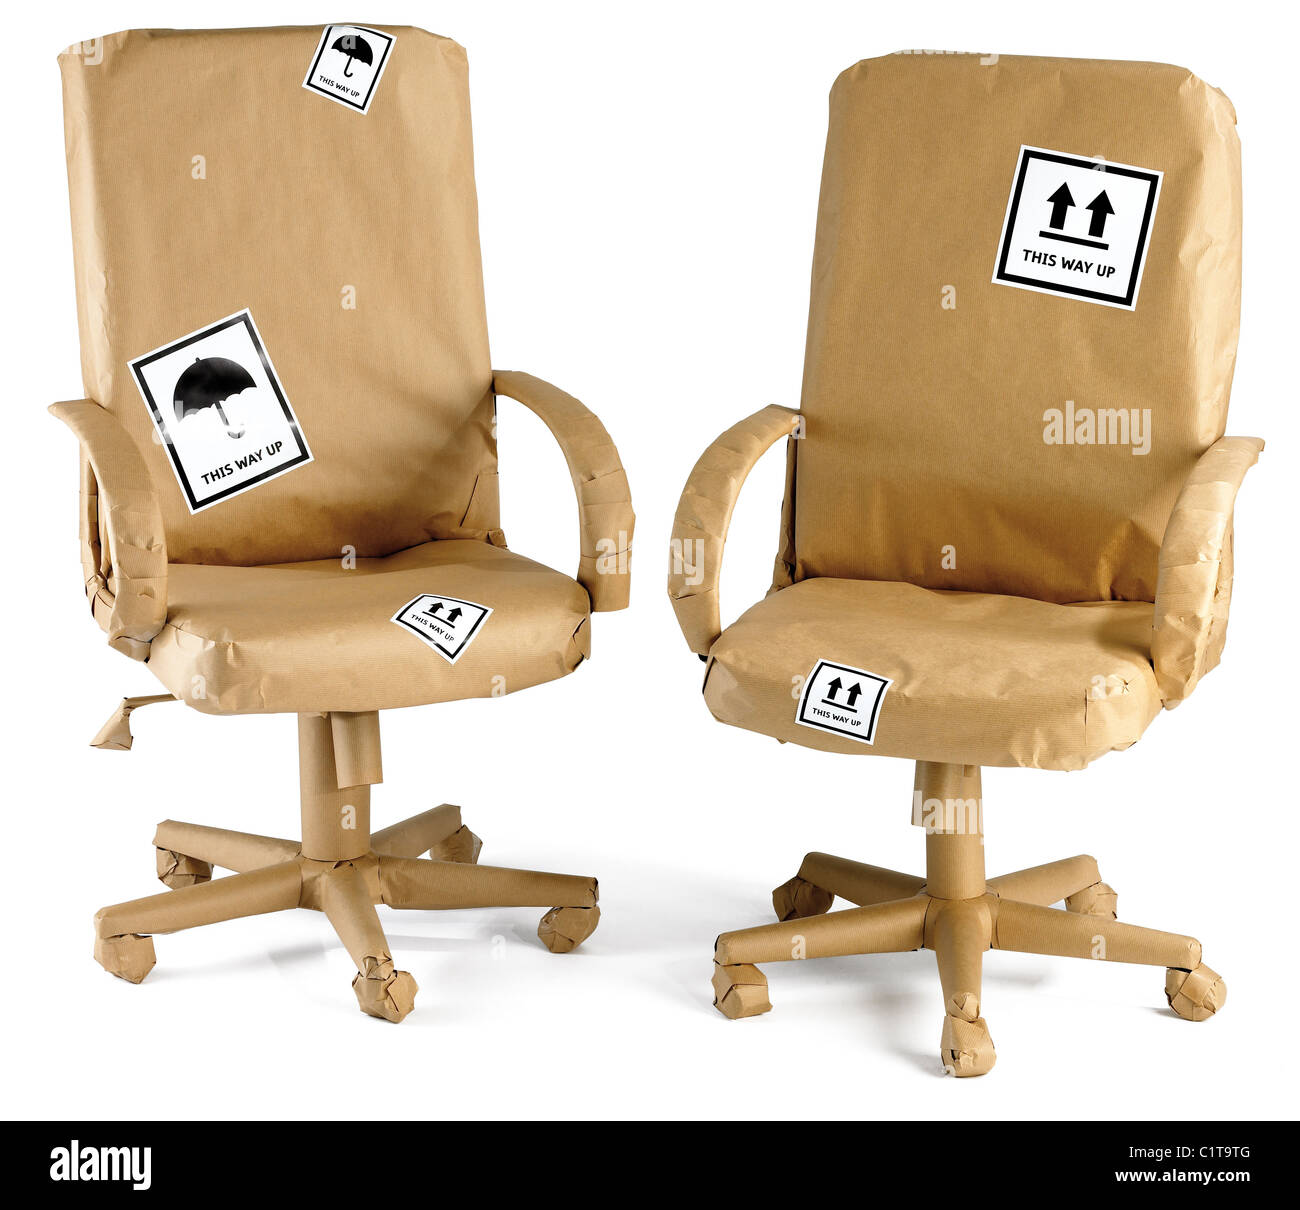 office chairs wrapped up in brown paper ready for a move isolated on a white background Stock Photo